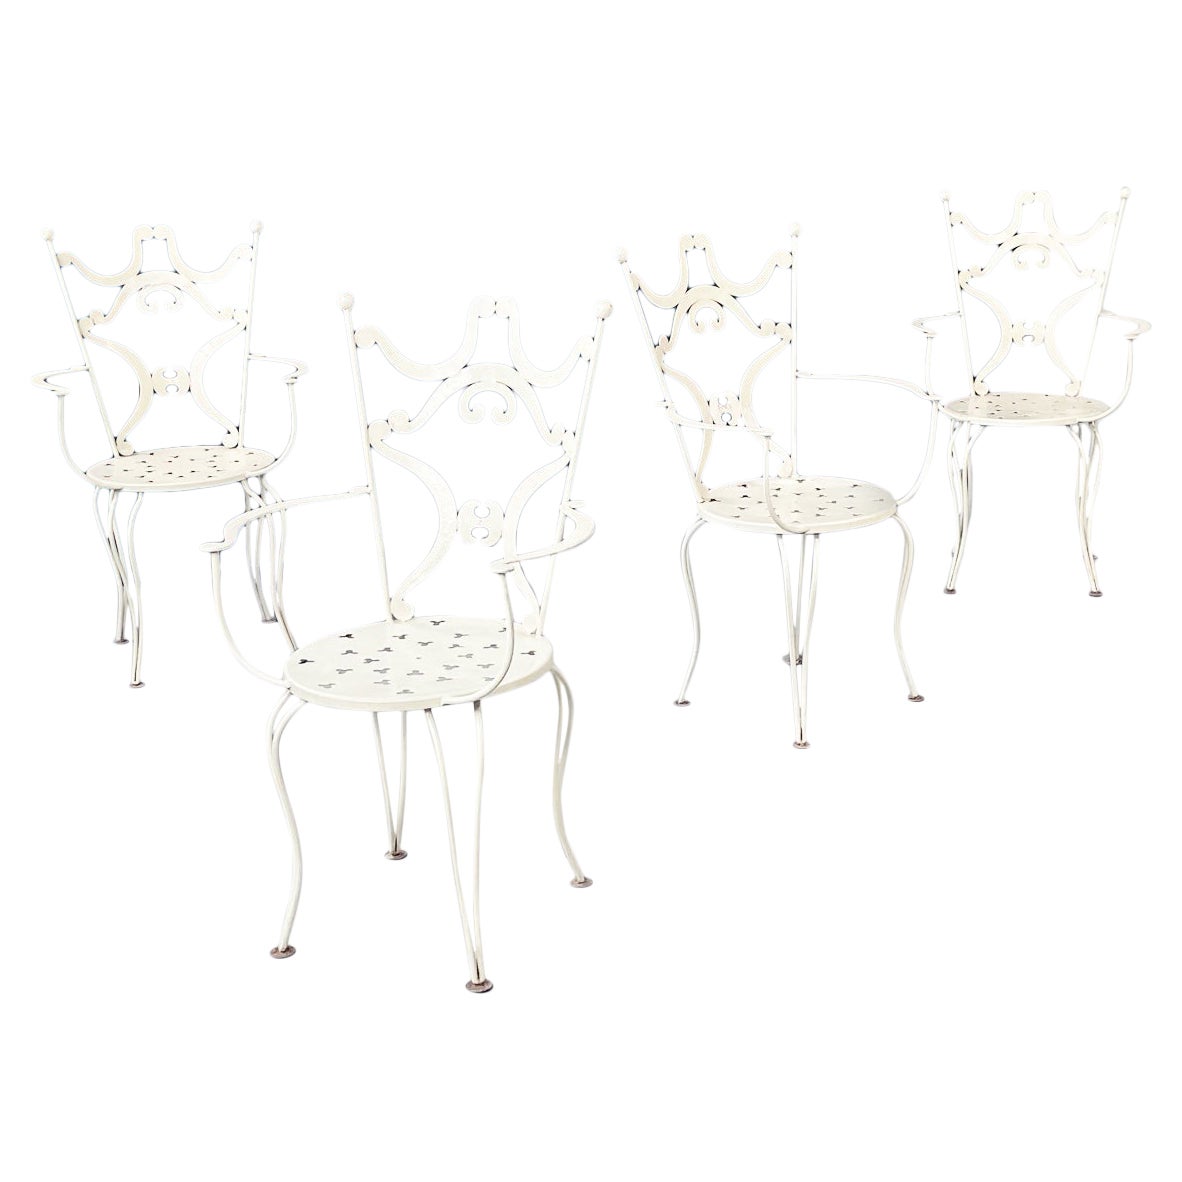 Italian Mid-Century Garden Chairs in White Wrought Iron Finely Worked, 1960s